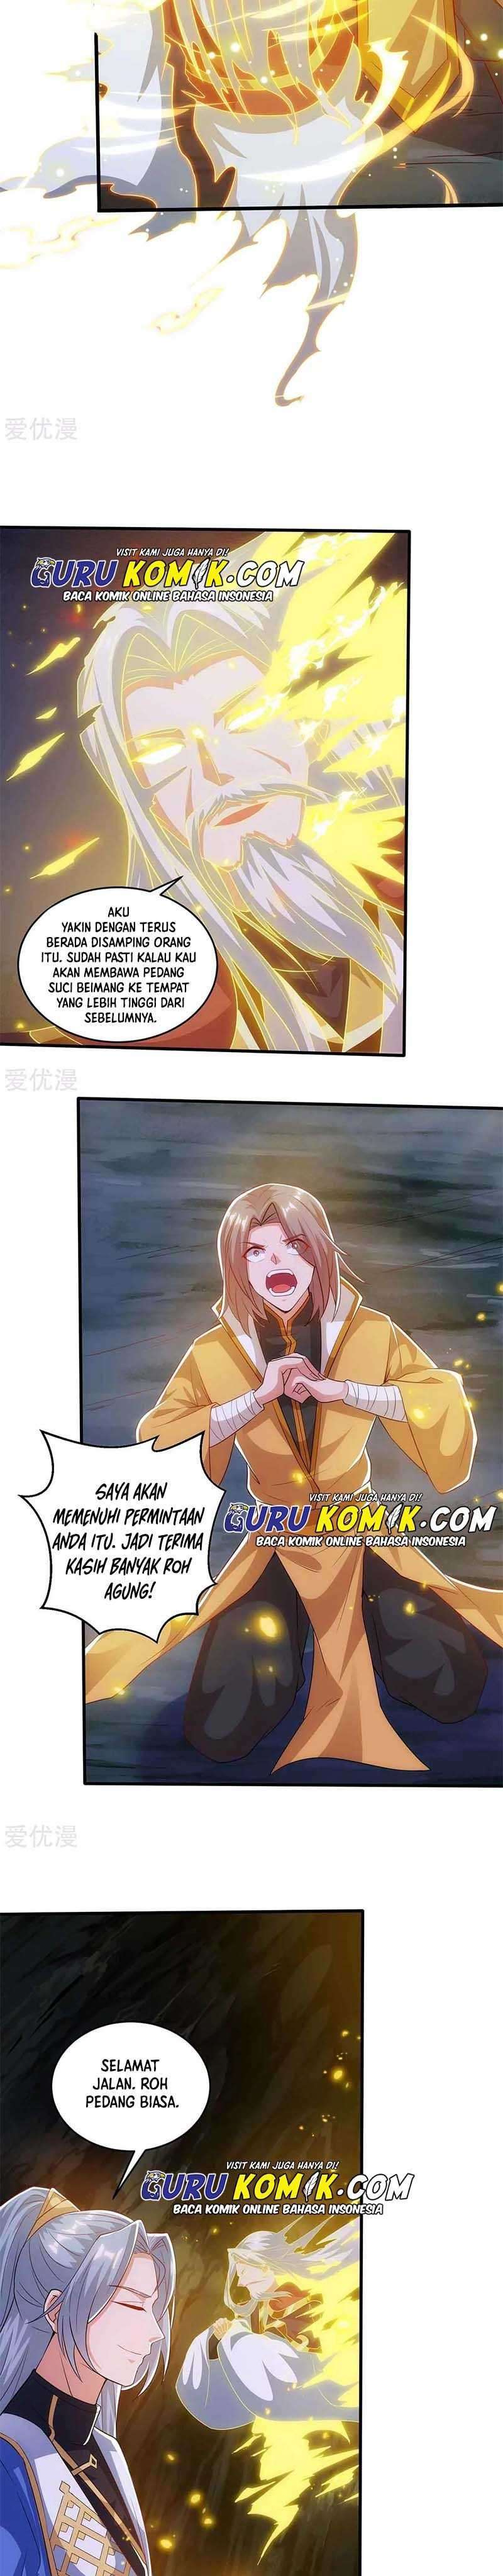 Rebirth After 80.000 Years Passed Chapter 188